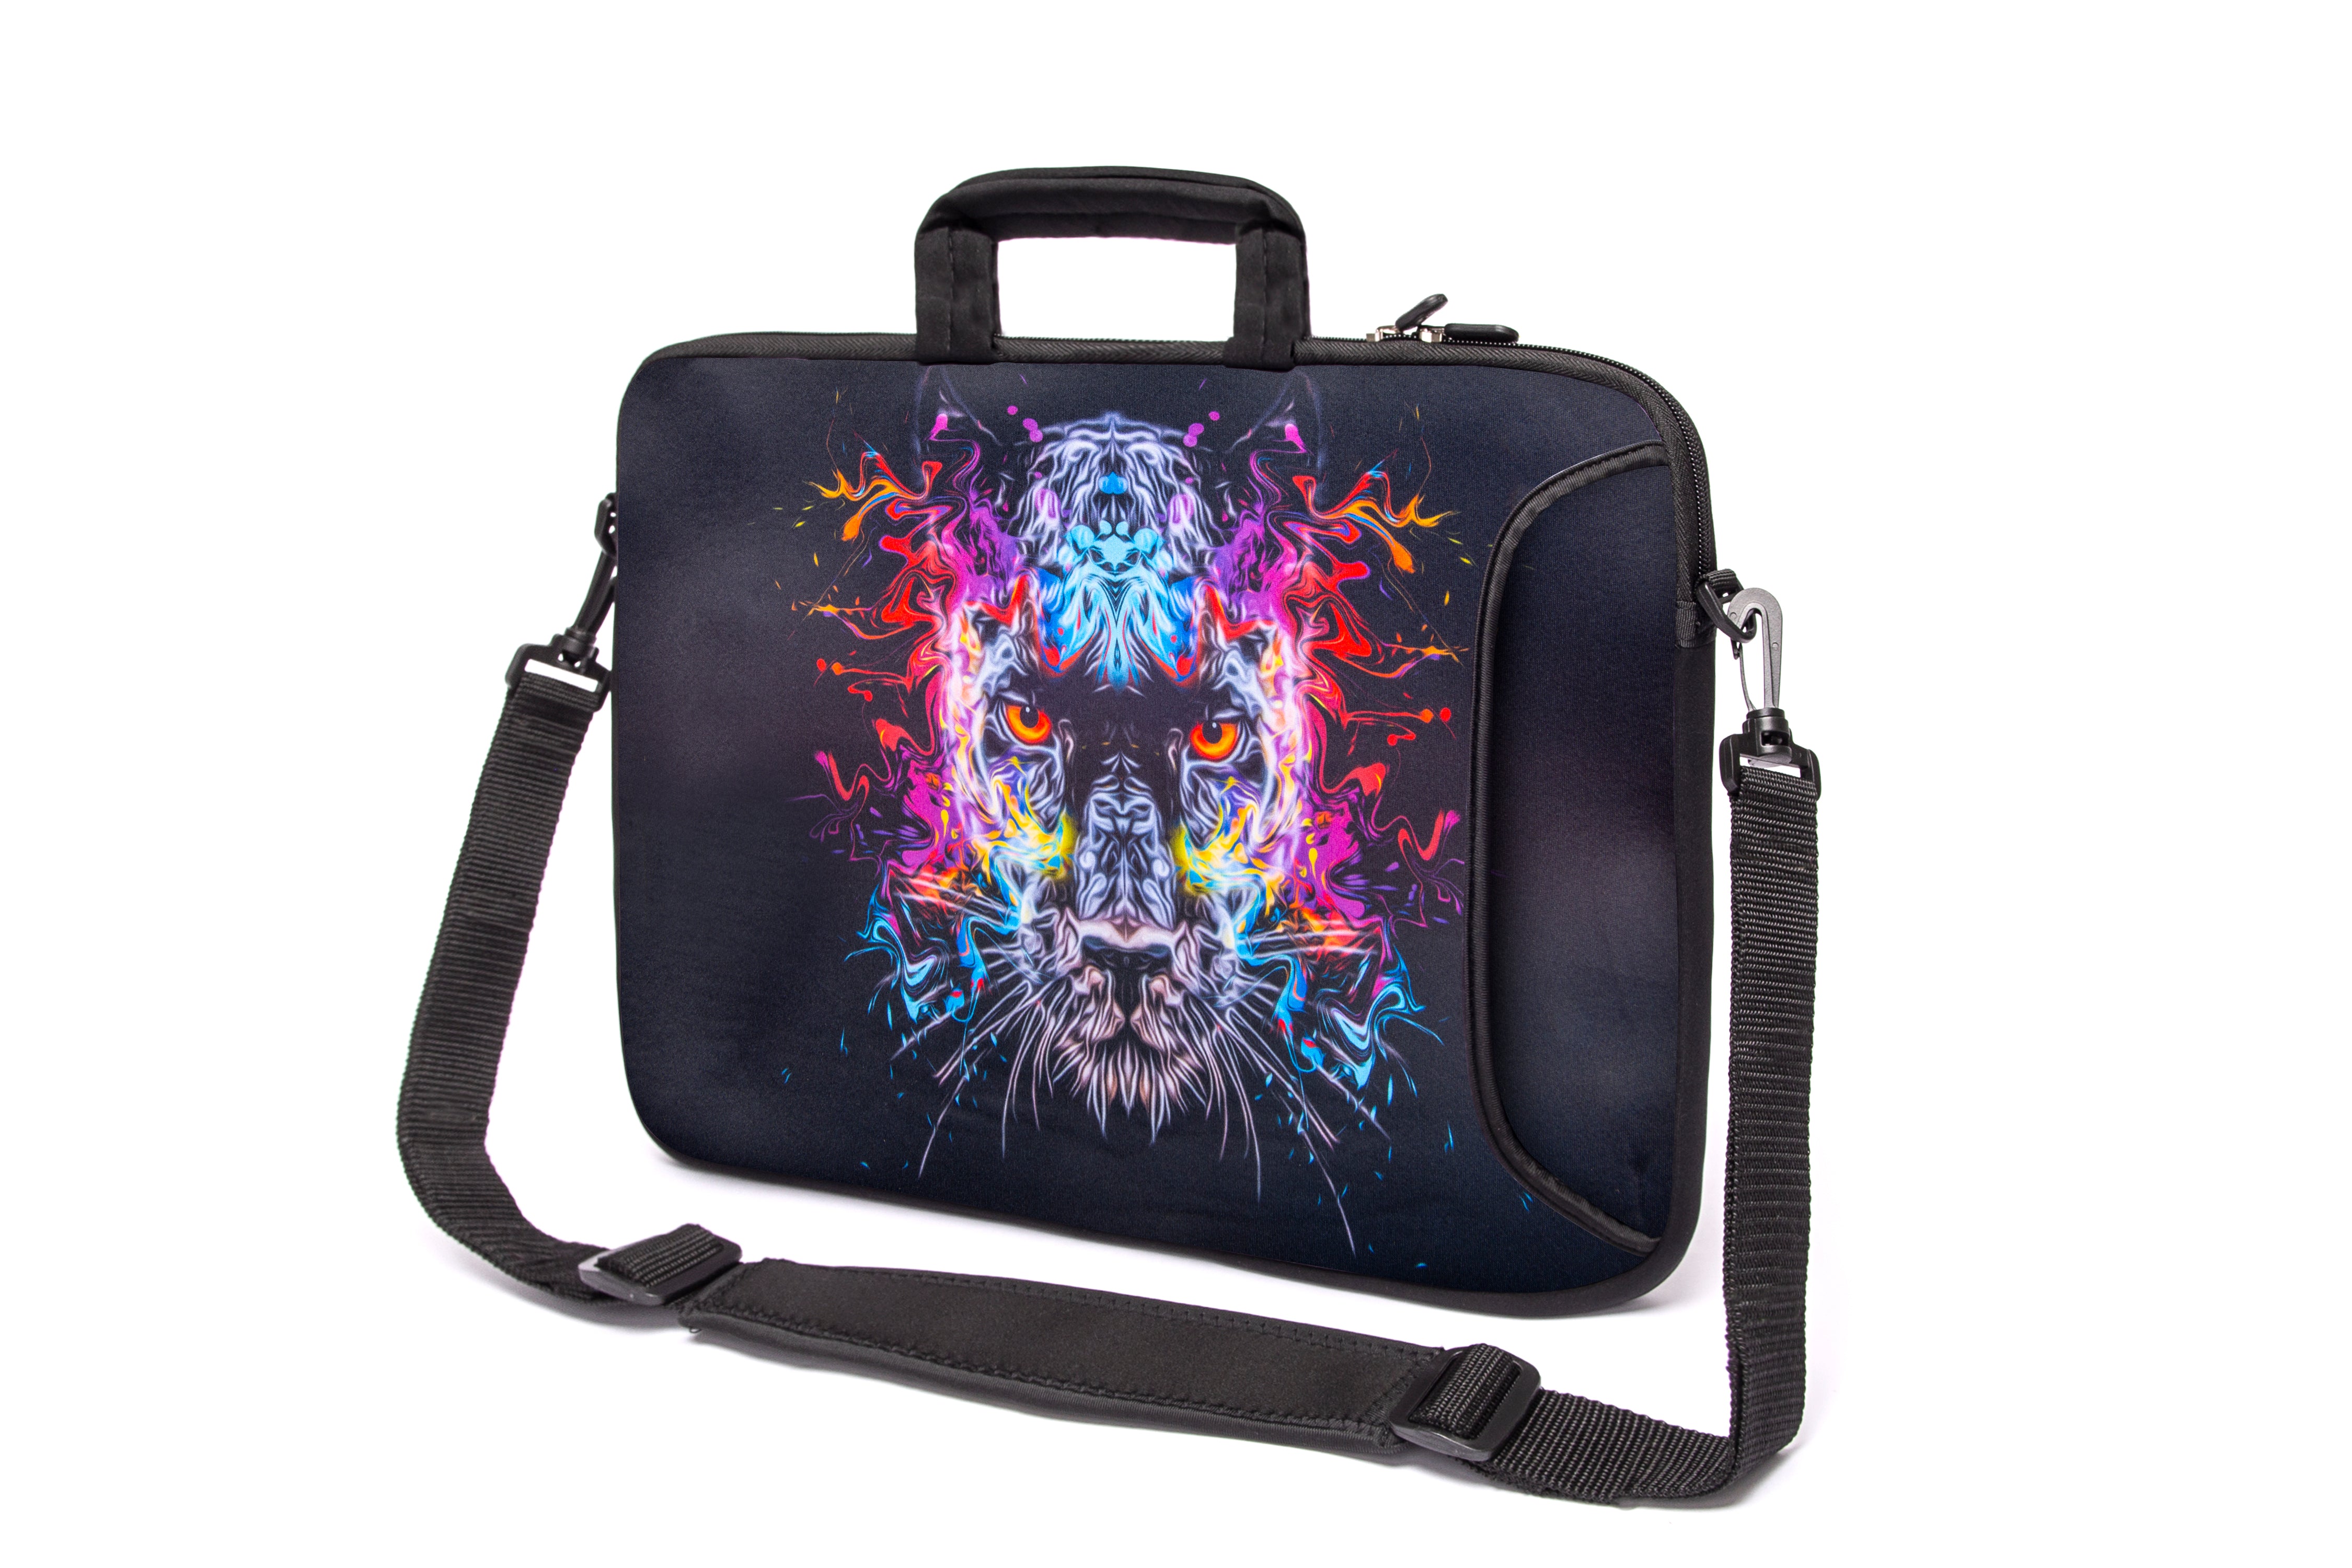 15"- 15.6" (inch) LAPTOP BAG CARRY CASE/BAG WITH HANDLE & STRAP NEOPRENE FOR LAPTOPS/NOTEBOOKS, *Colour Tiger*